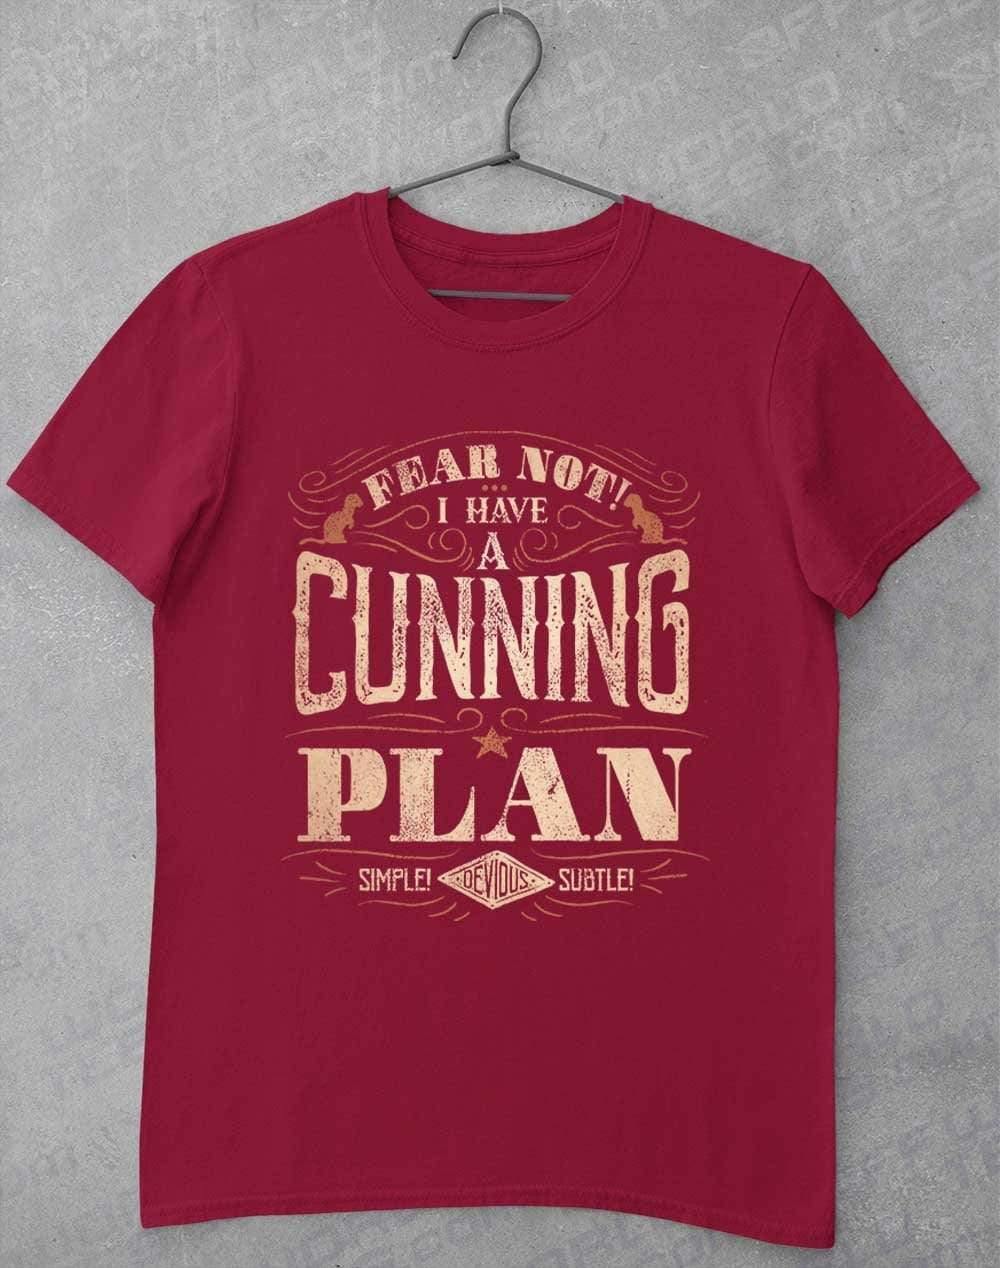 I Have a Cunning Plan T-Shirt S / Cardinal Red  - Off World Tees